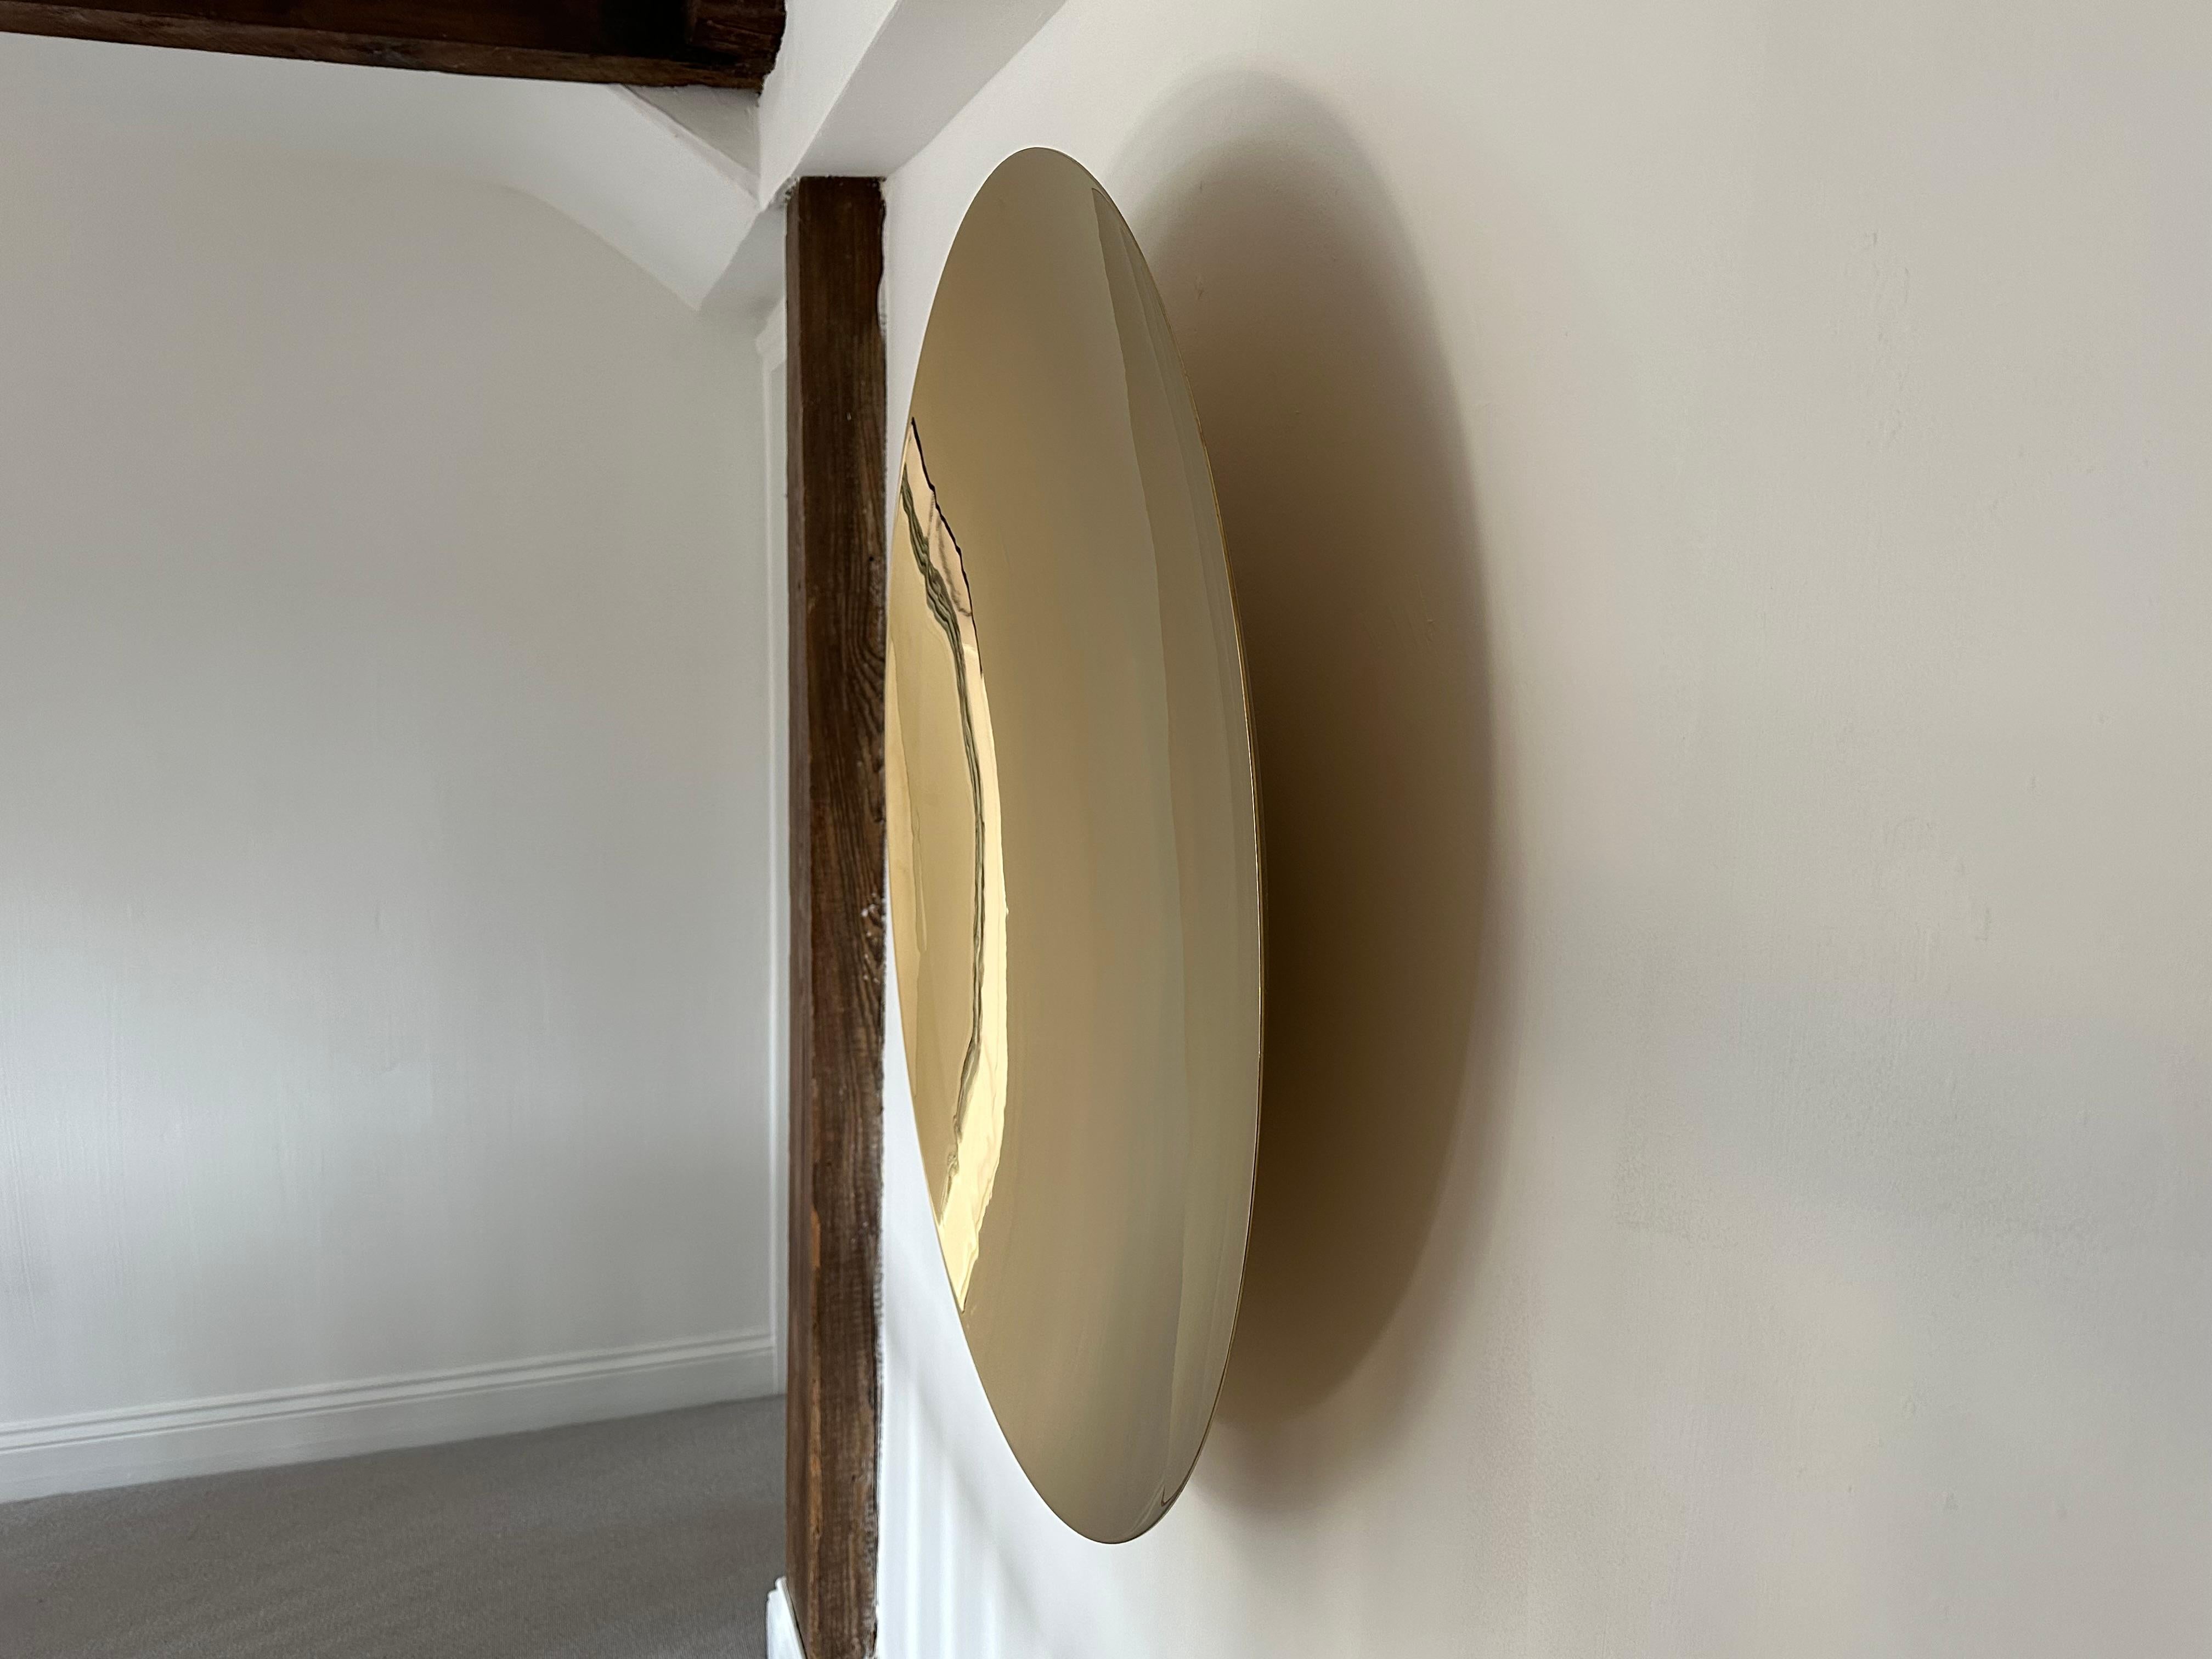 The Ferrara Nero is a highly decorative convex wall mirror that creates a focal point and adds elegance to any room. 

The mirror itself is silvered using traditional methods and fabricated from 6mm low iron glass with a curvature of 7 cms.